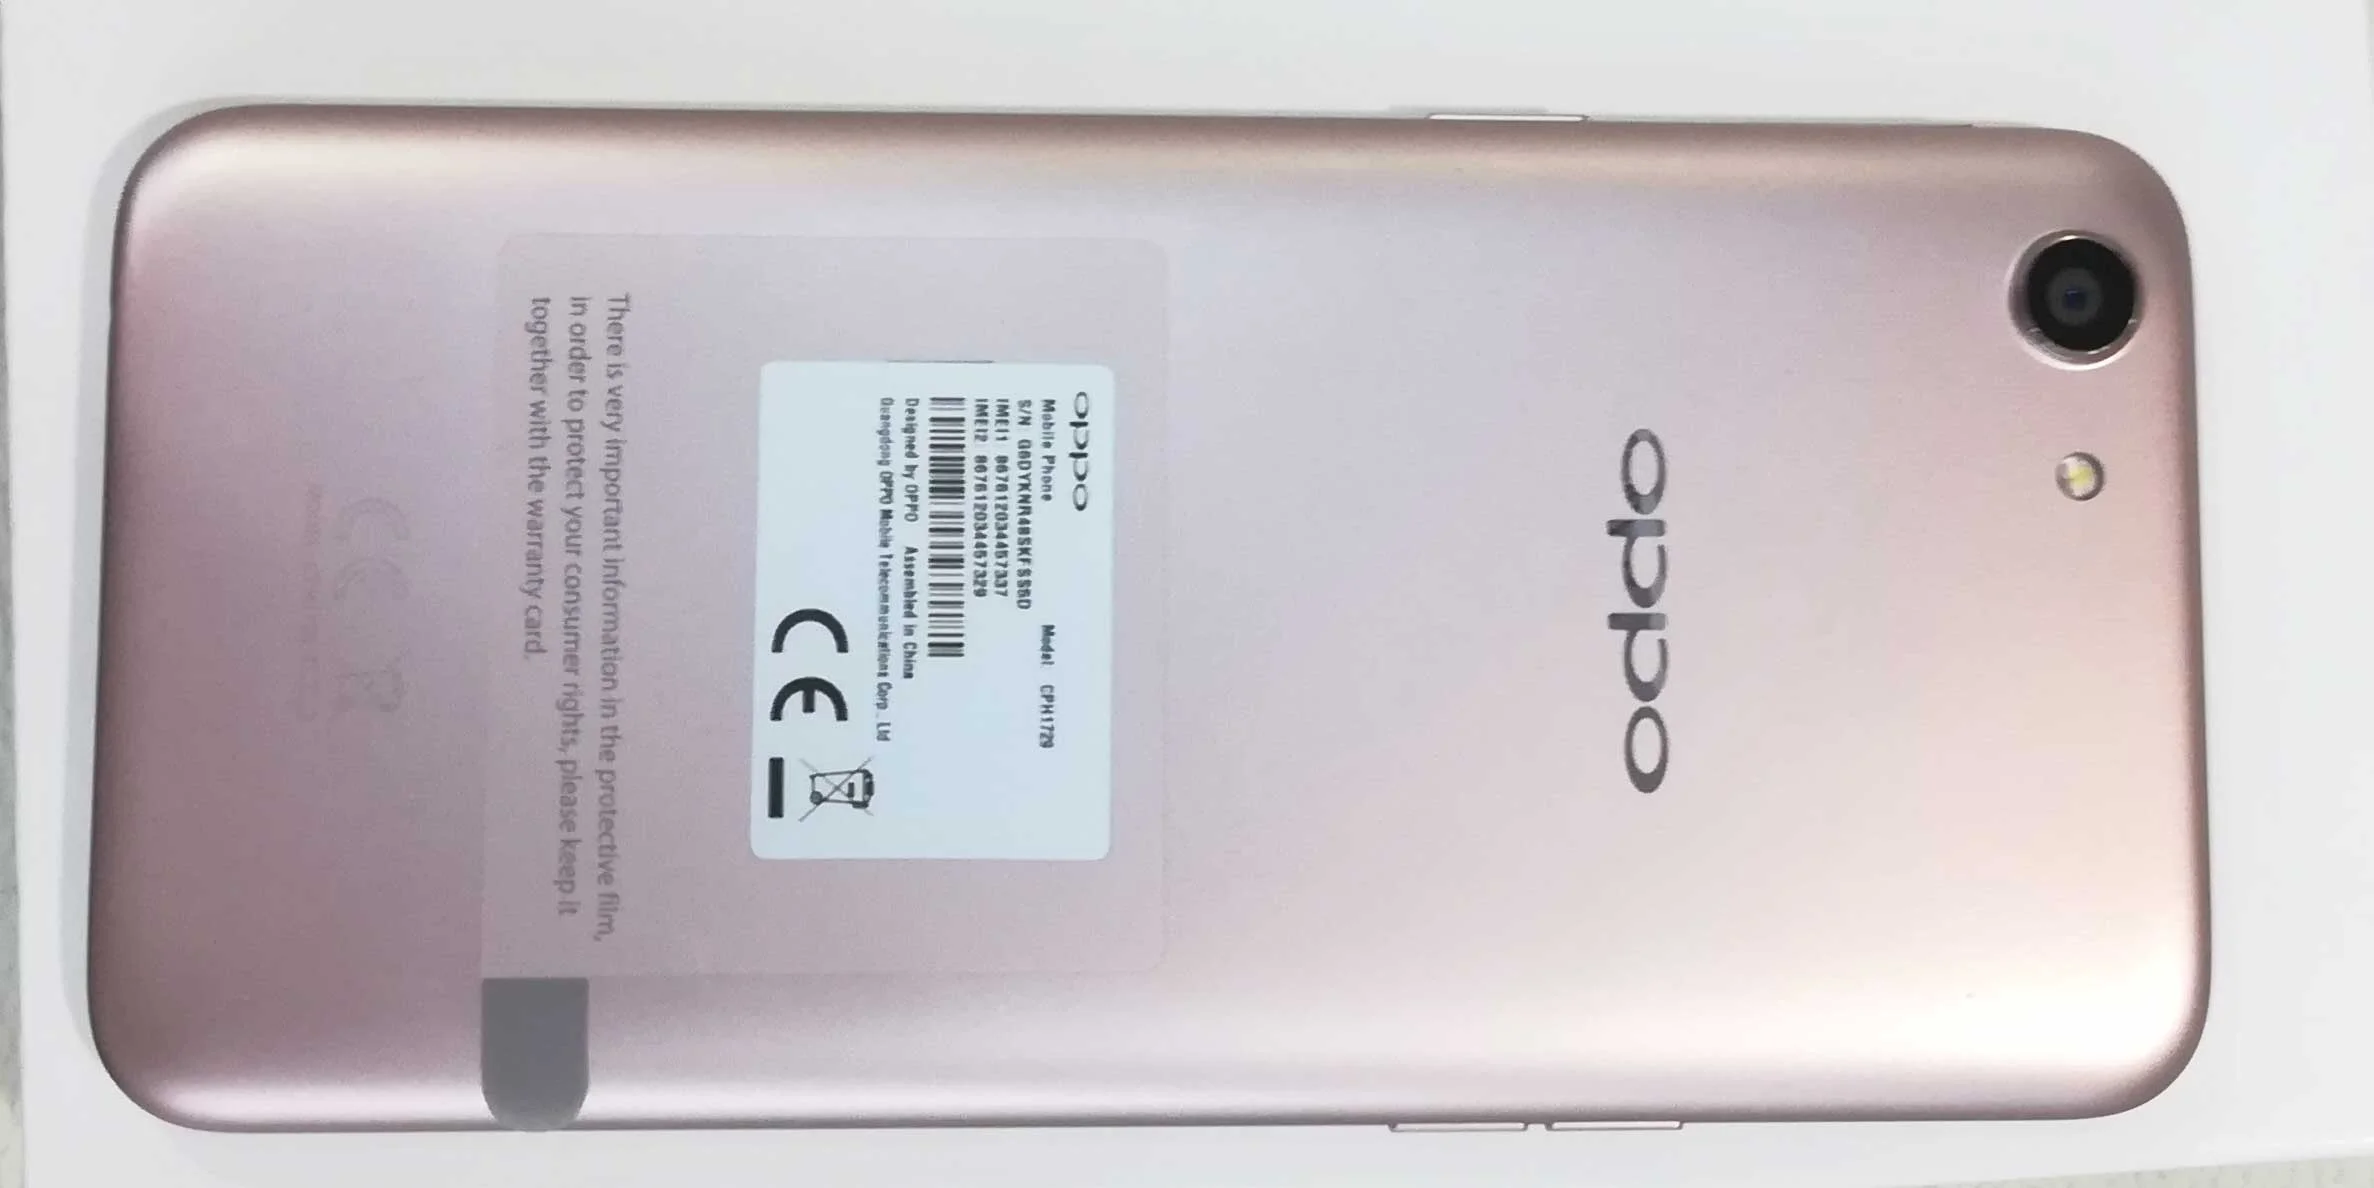 oppo mobile A83 (CPH1729)specifications and image